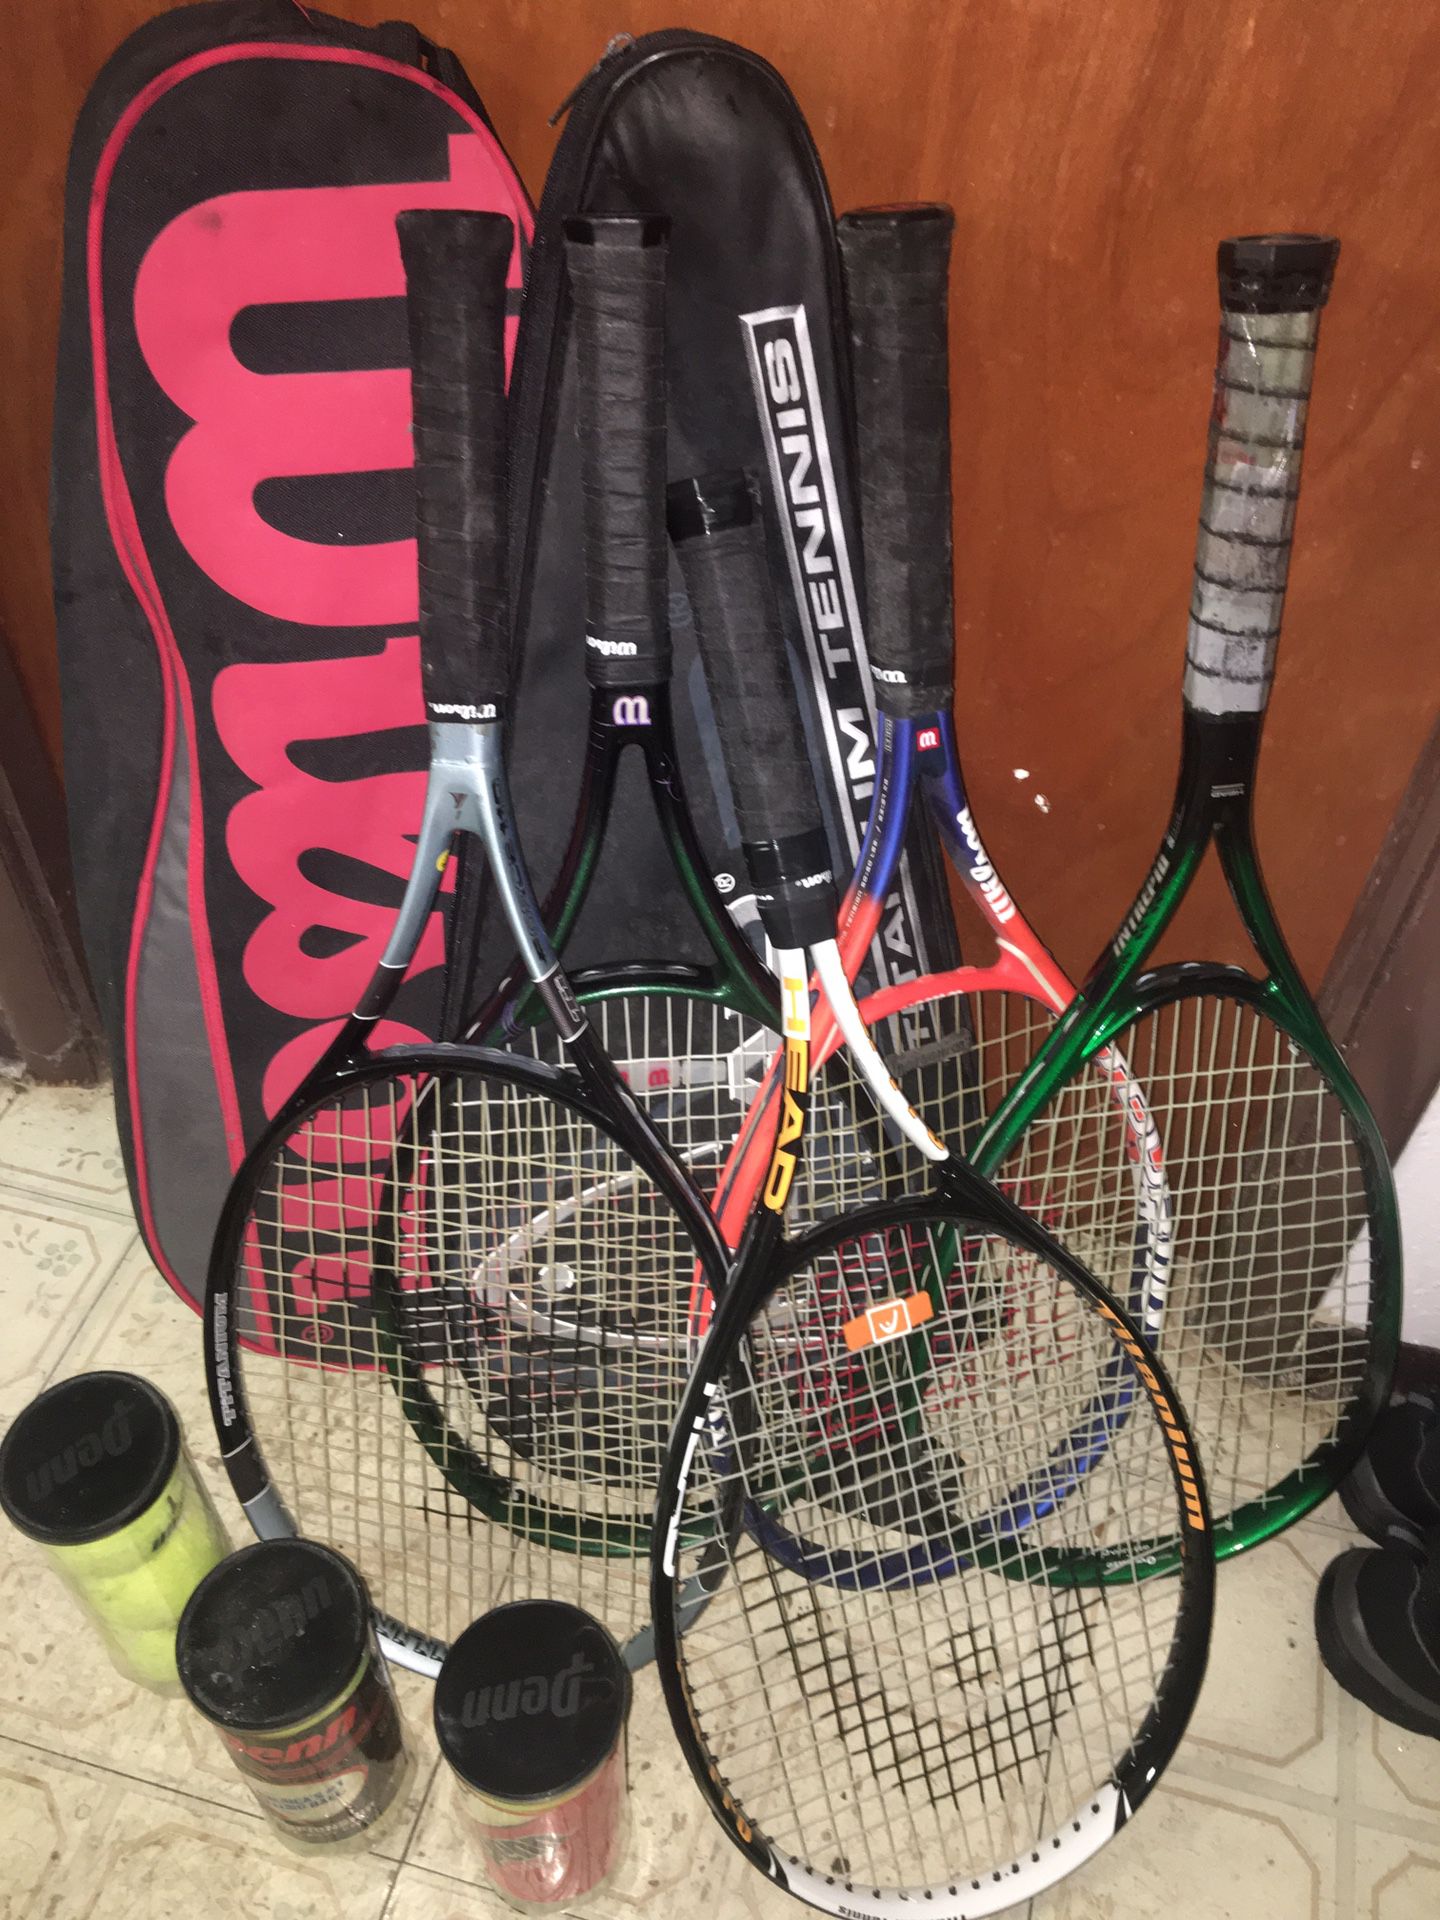 Tennis rackets for sale moving need gone asap